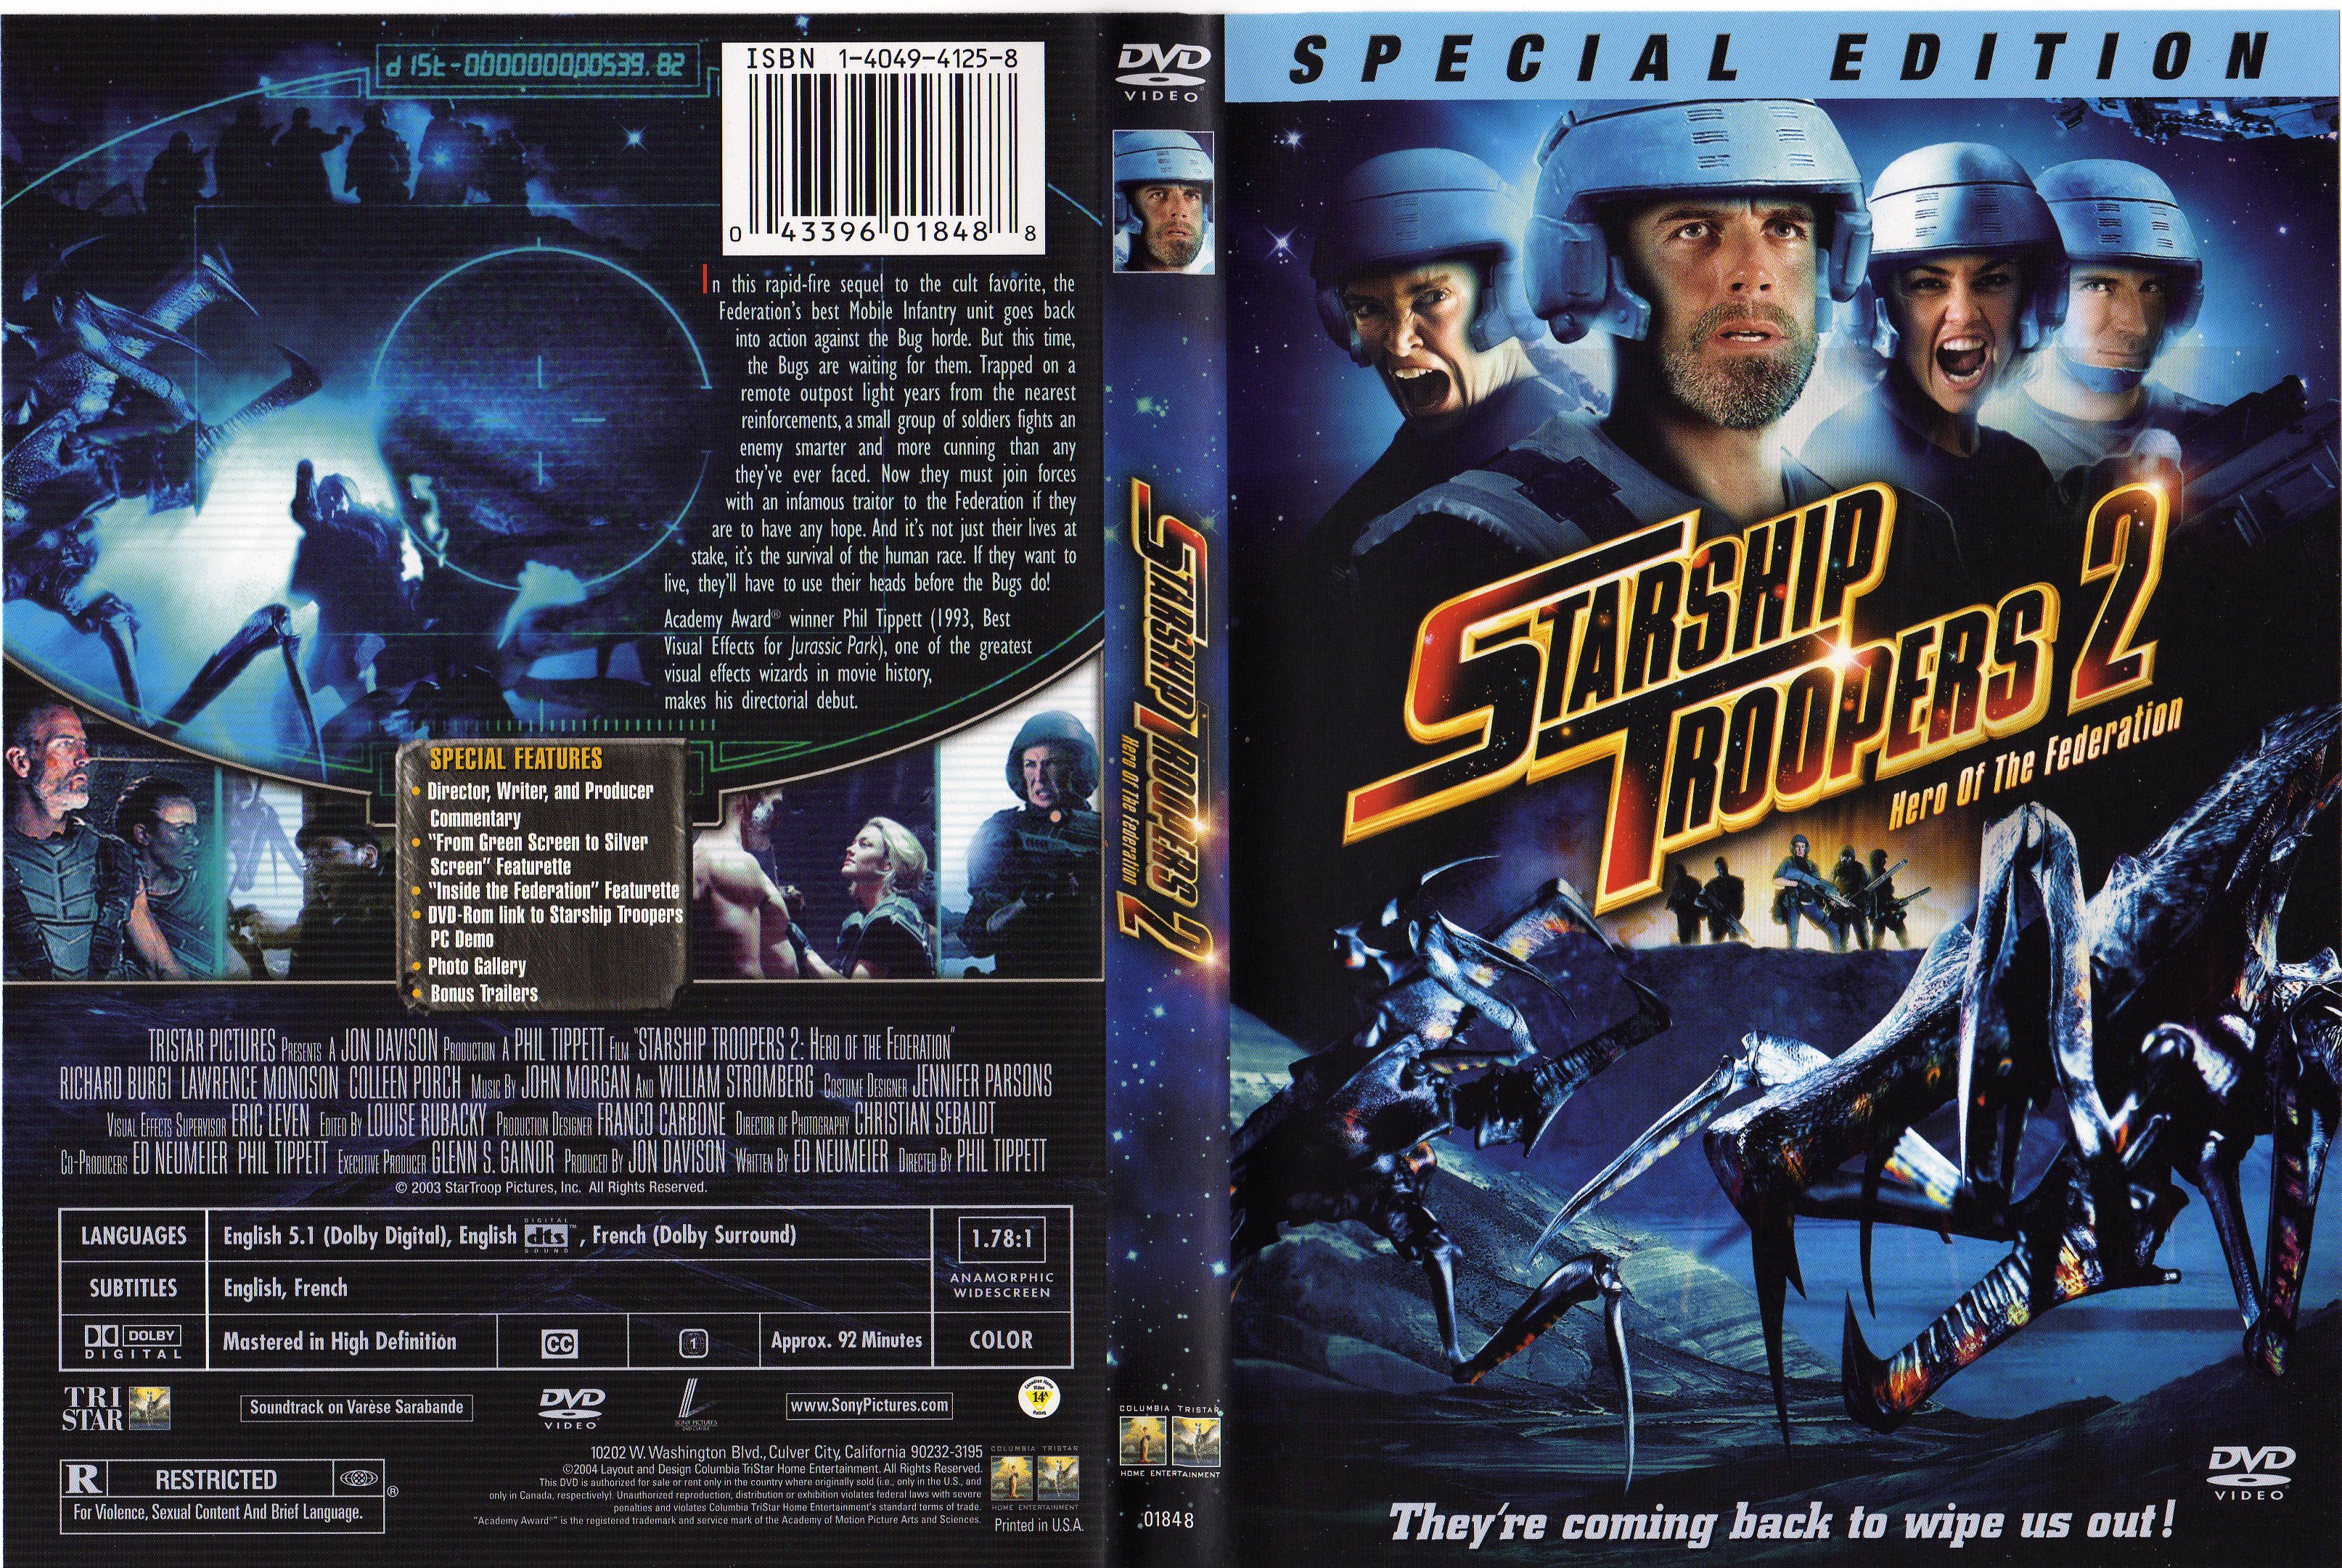 Jaquette DVD Starship troopers 2 Zone 1